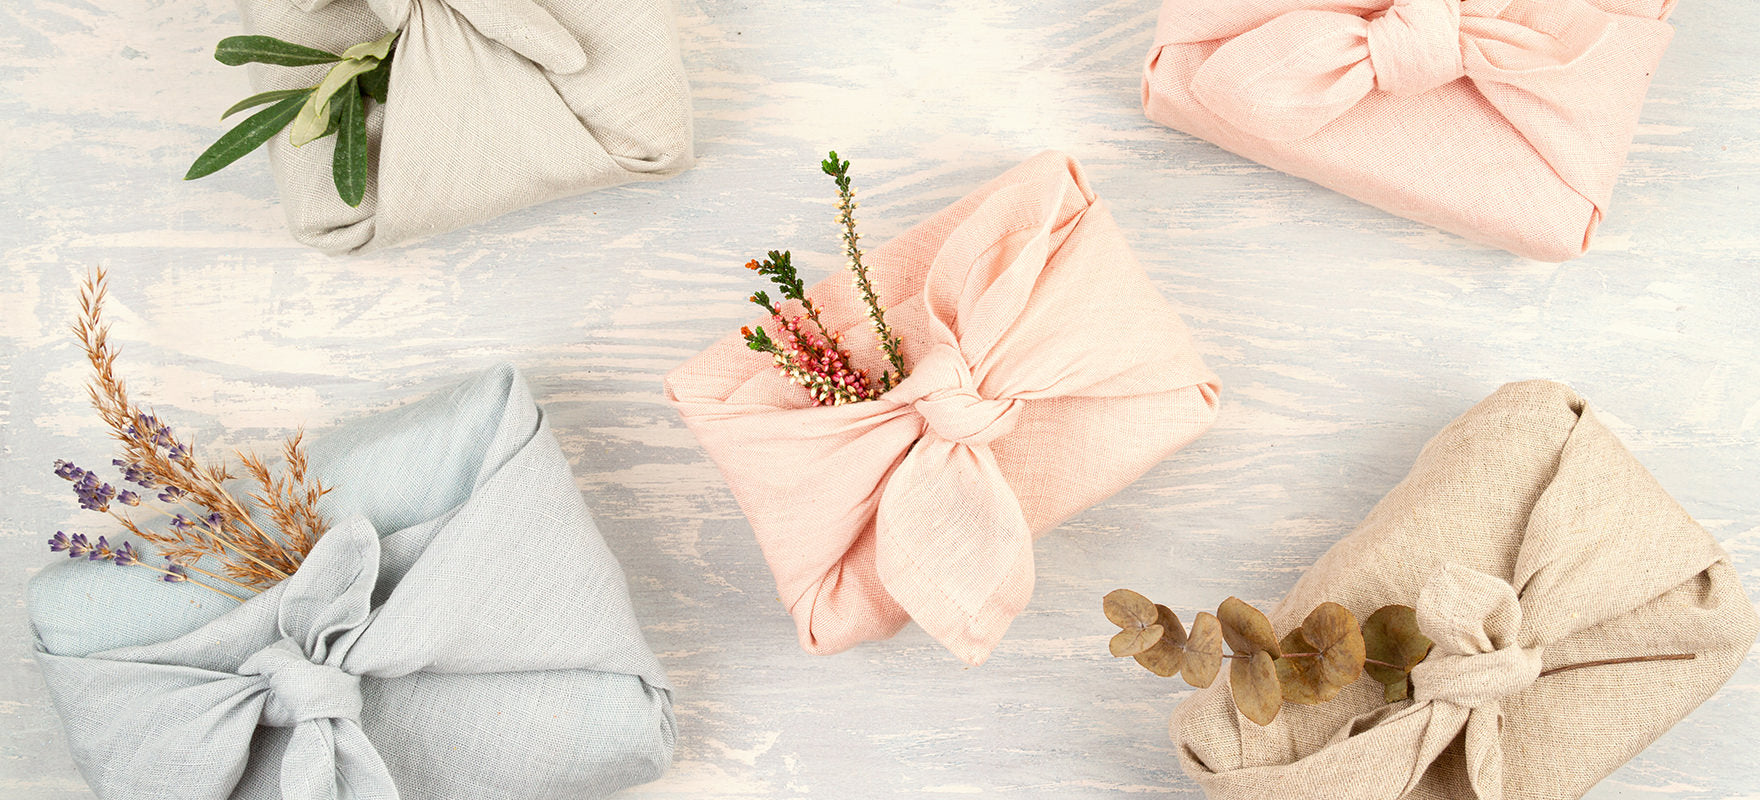 Five multicoloured cloths are artfully wrapped around gifts as a way to reduce landfill waste around the holidays from excess gift wrapping. These furoshiki wraps are an eco-friendly gift wrapping idea. 